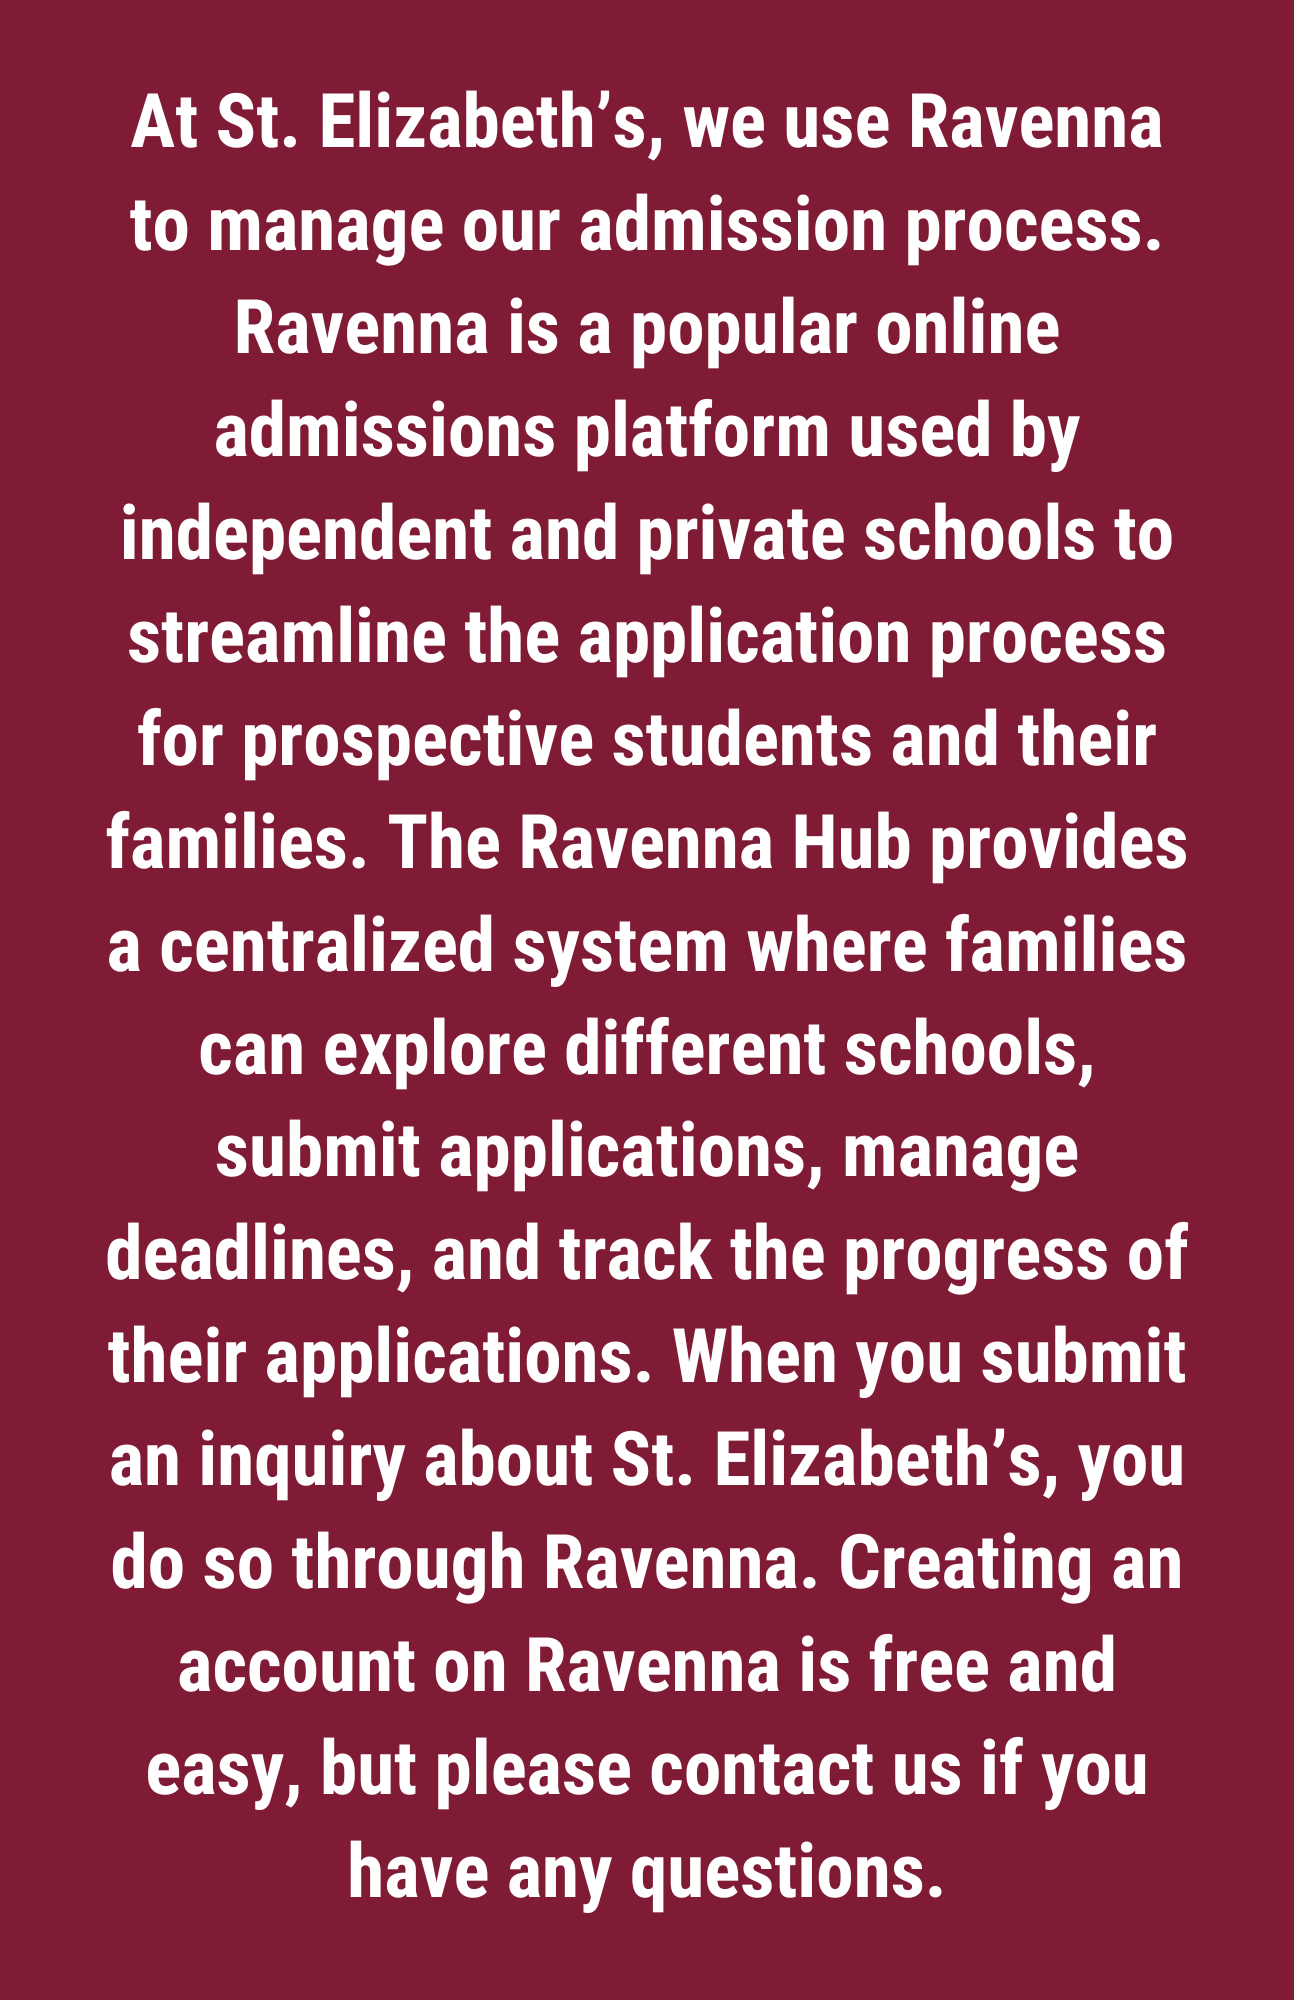 At St. Elizabeth’s, we use Ravenna to manage our admission process. Ravenna is a popular online admissions platform used by independent and private schools to streamline the application process for prospective students and their families. The Ravenna Hub provides a centralized system where families can explore different schools, submit applications, manage deadlines, and track the progress of their applications. When you submit an inquiry about St. Elizabeth’s, you do so through Ravenna. Creating an account on Ravenna is free and easy, but please contact us if you have any questions.